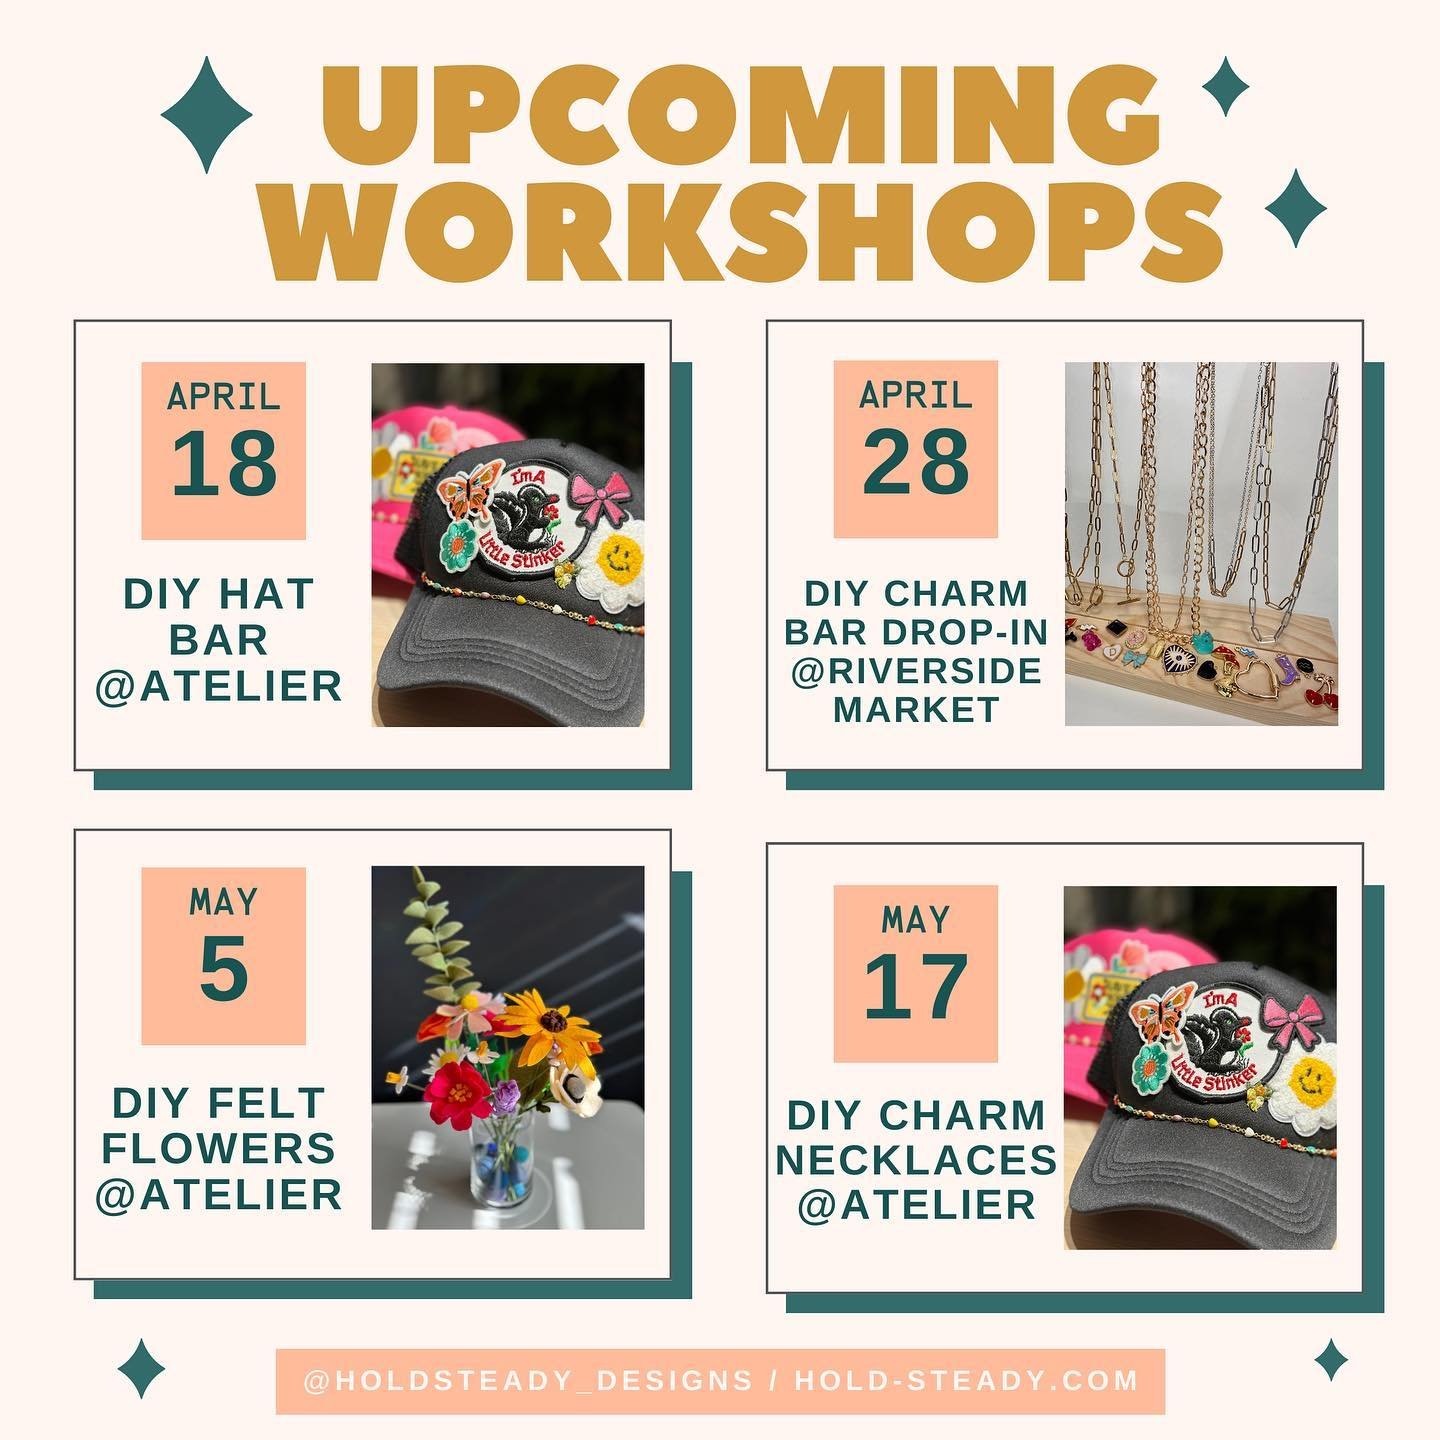 Join me for some diy workshops this Spring. Felt flower bouquets just in time for Mother&rsquo;s Day 🌷 Diy chunky charm necklaces and patch hats @atelierinreno 💕 Catch the drop in diy charm bar at my @riversidefarmersmarketreno booth the end of Apr